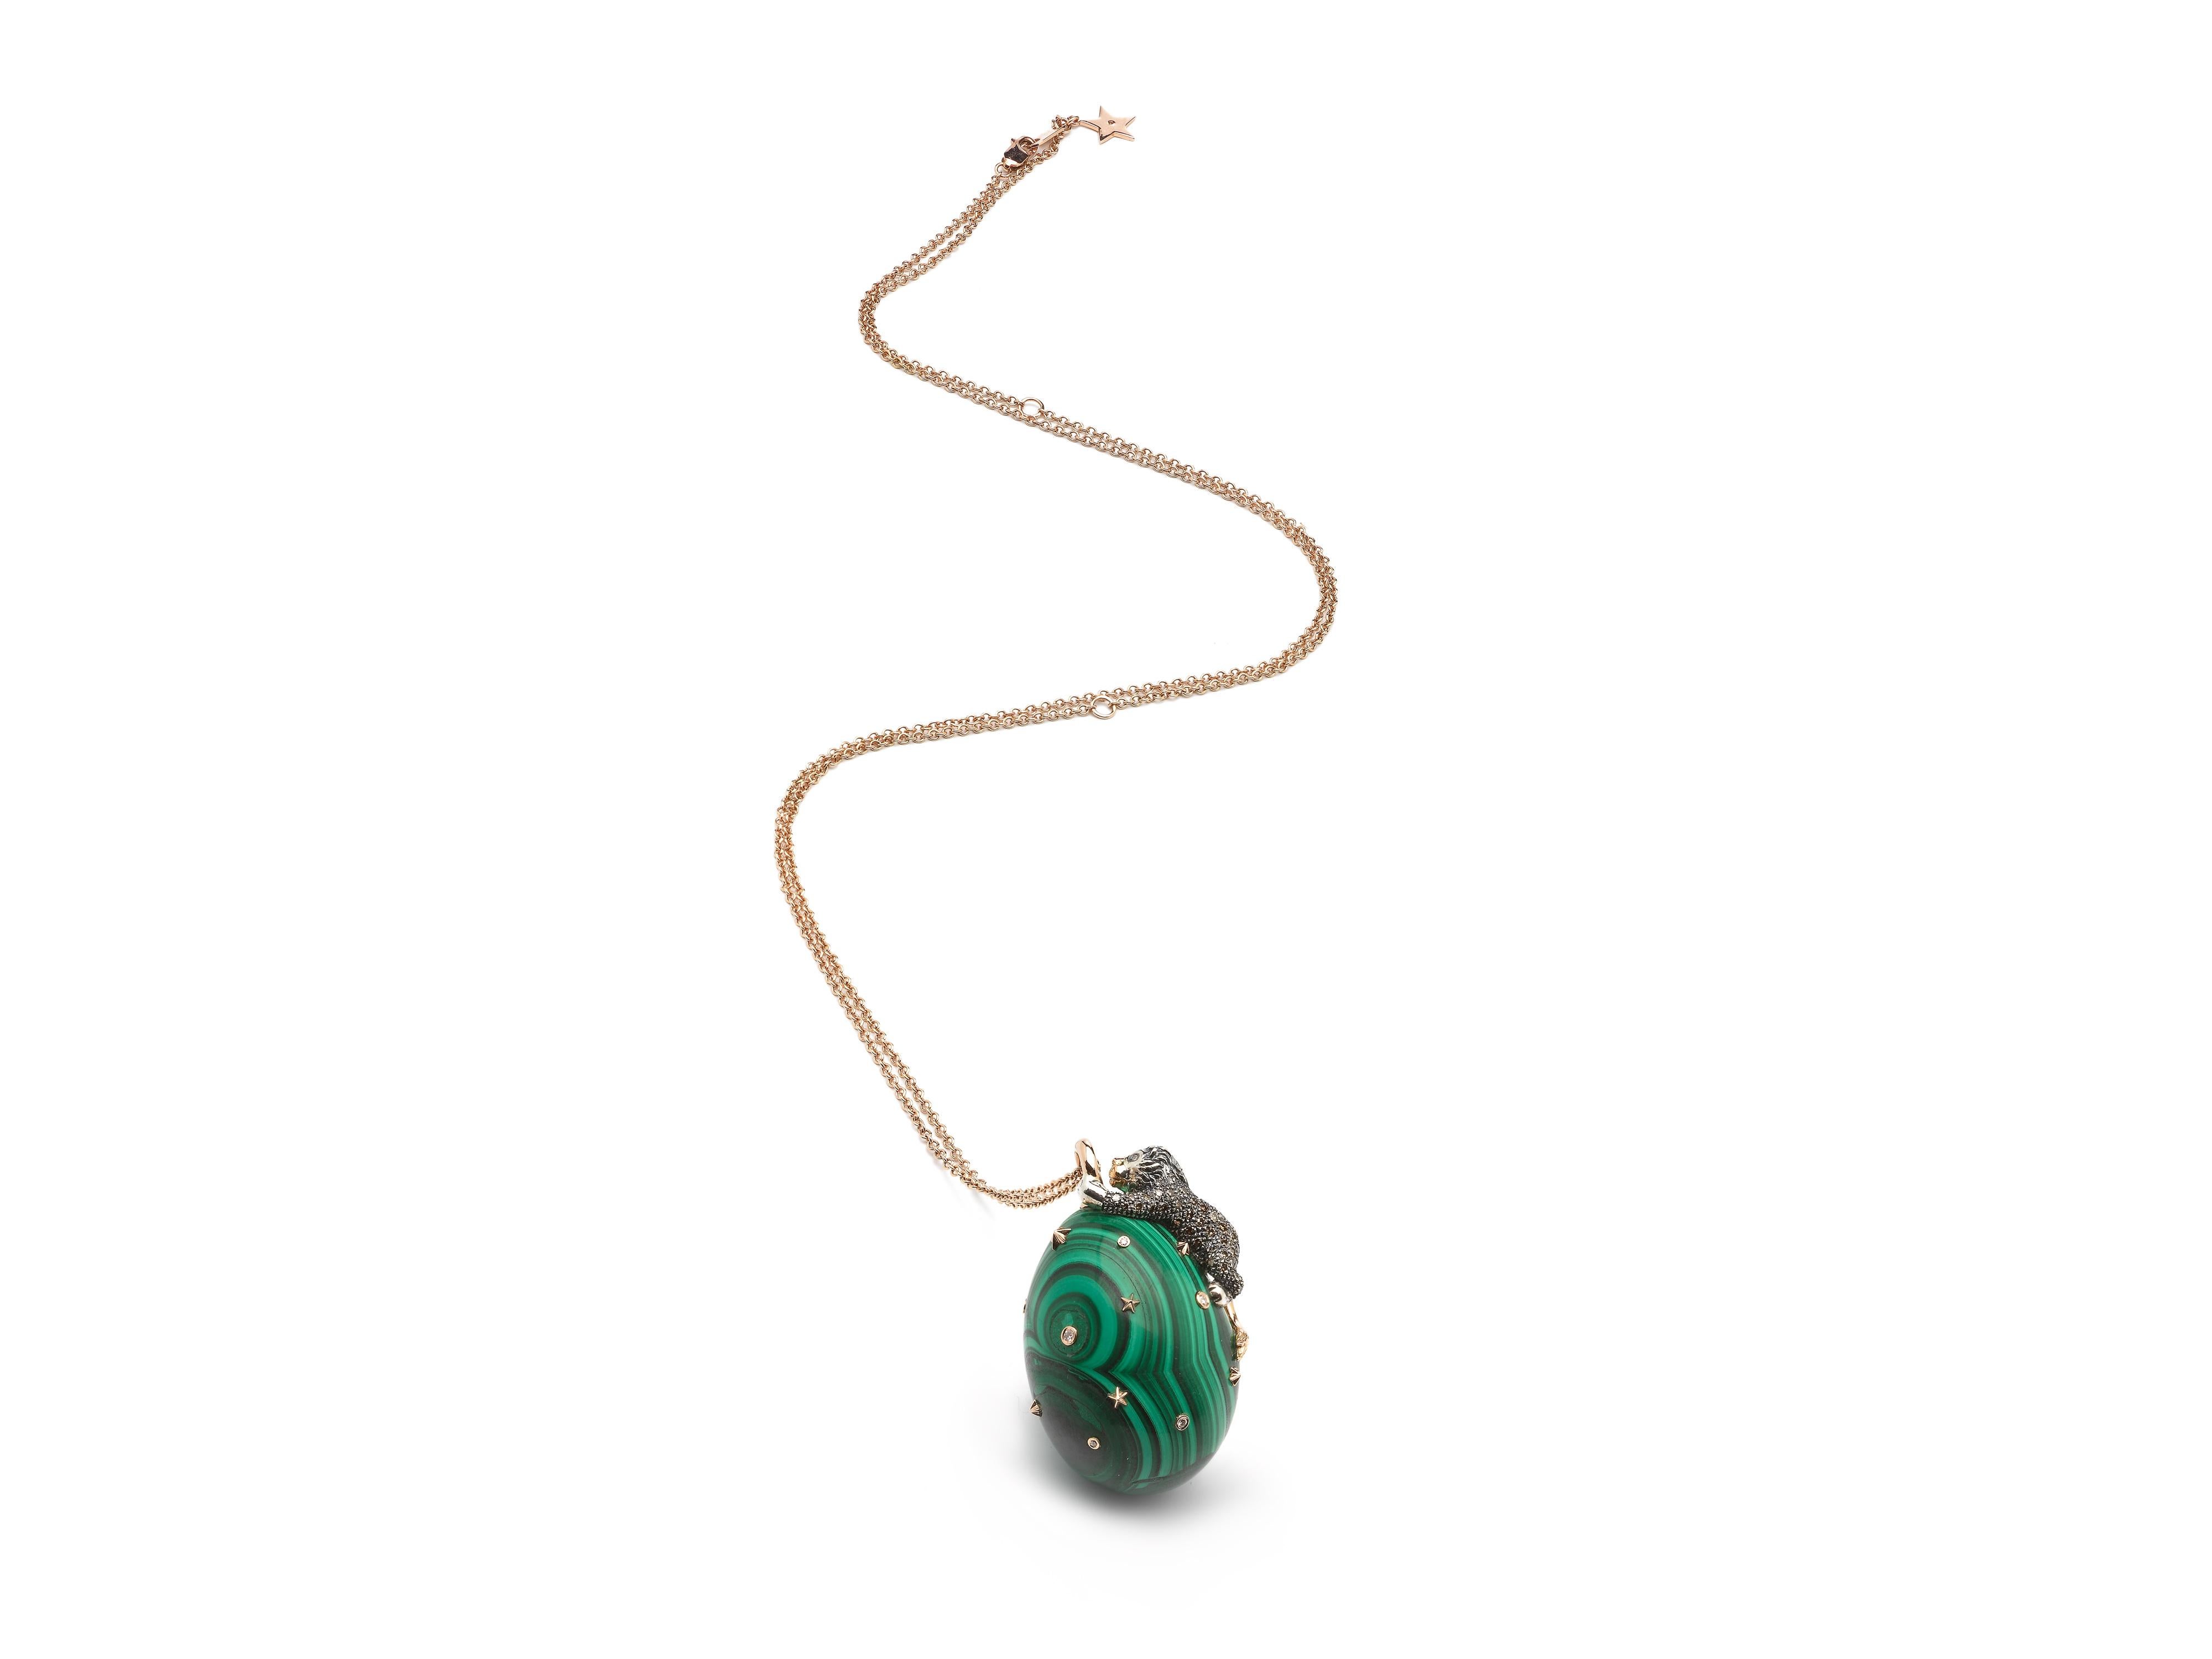 Contemporary Diamond Lion on Green Malachite Energy Necklace 18k Gold and Sterling Silver